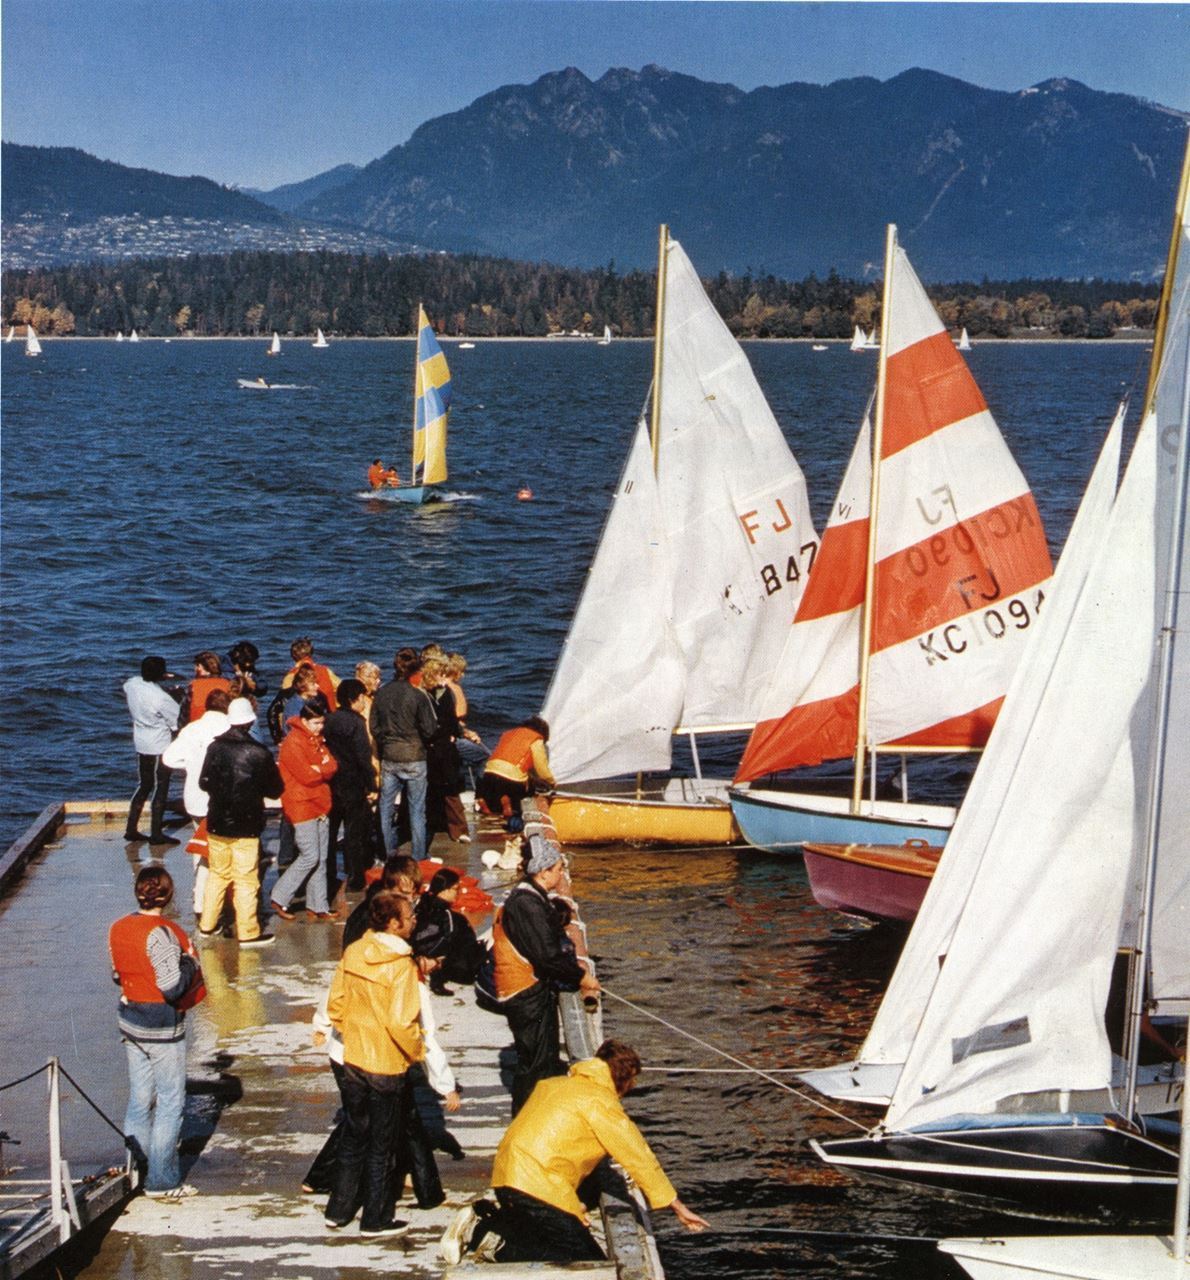 UBC Flying Juniors at the Kitsilano dock. The Fireballs in the foreground are KYC members’ boats. This picture appeared in the Winter issue of the Beautiful BC magazine. I’m the guy wearing the yellow oilskin jacket, standing in the foreground. A couple of KYC Fireballs are also visible at the lower right, as well as a sliver of a Laser. 